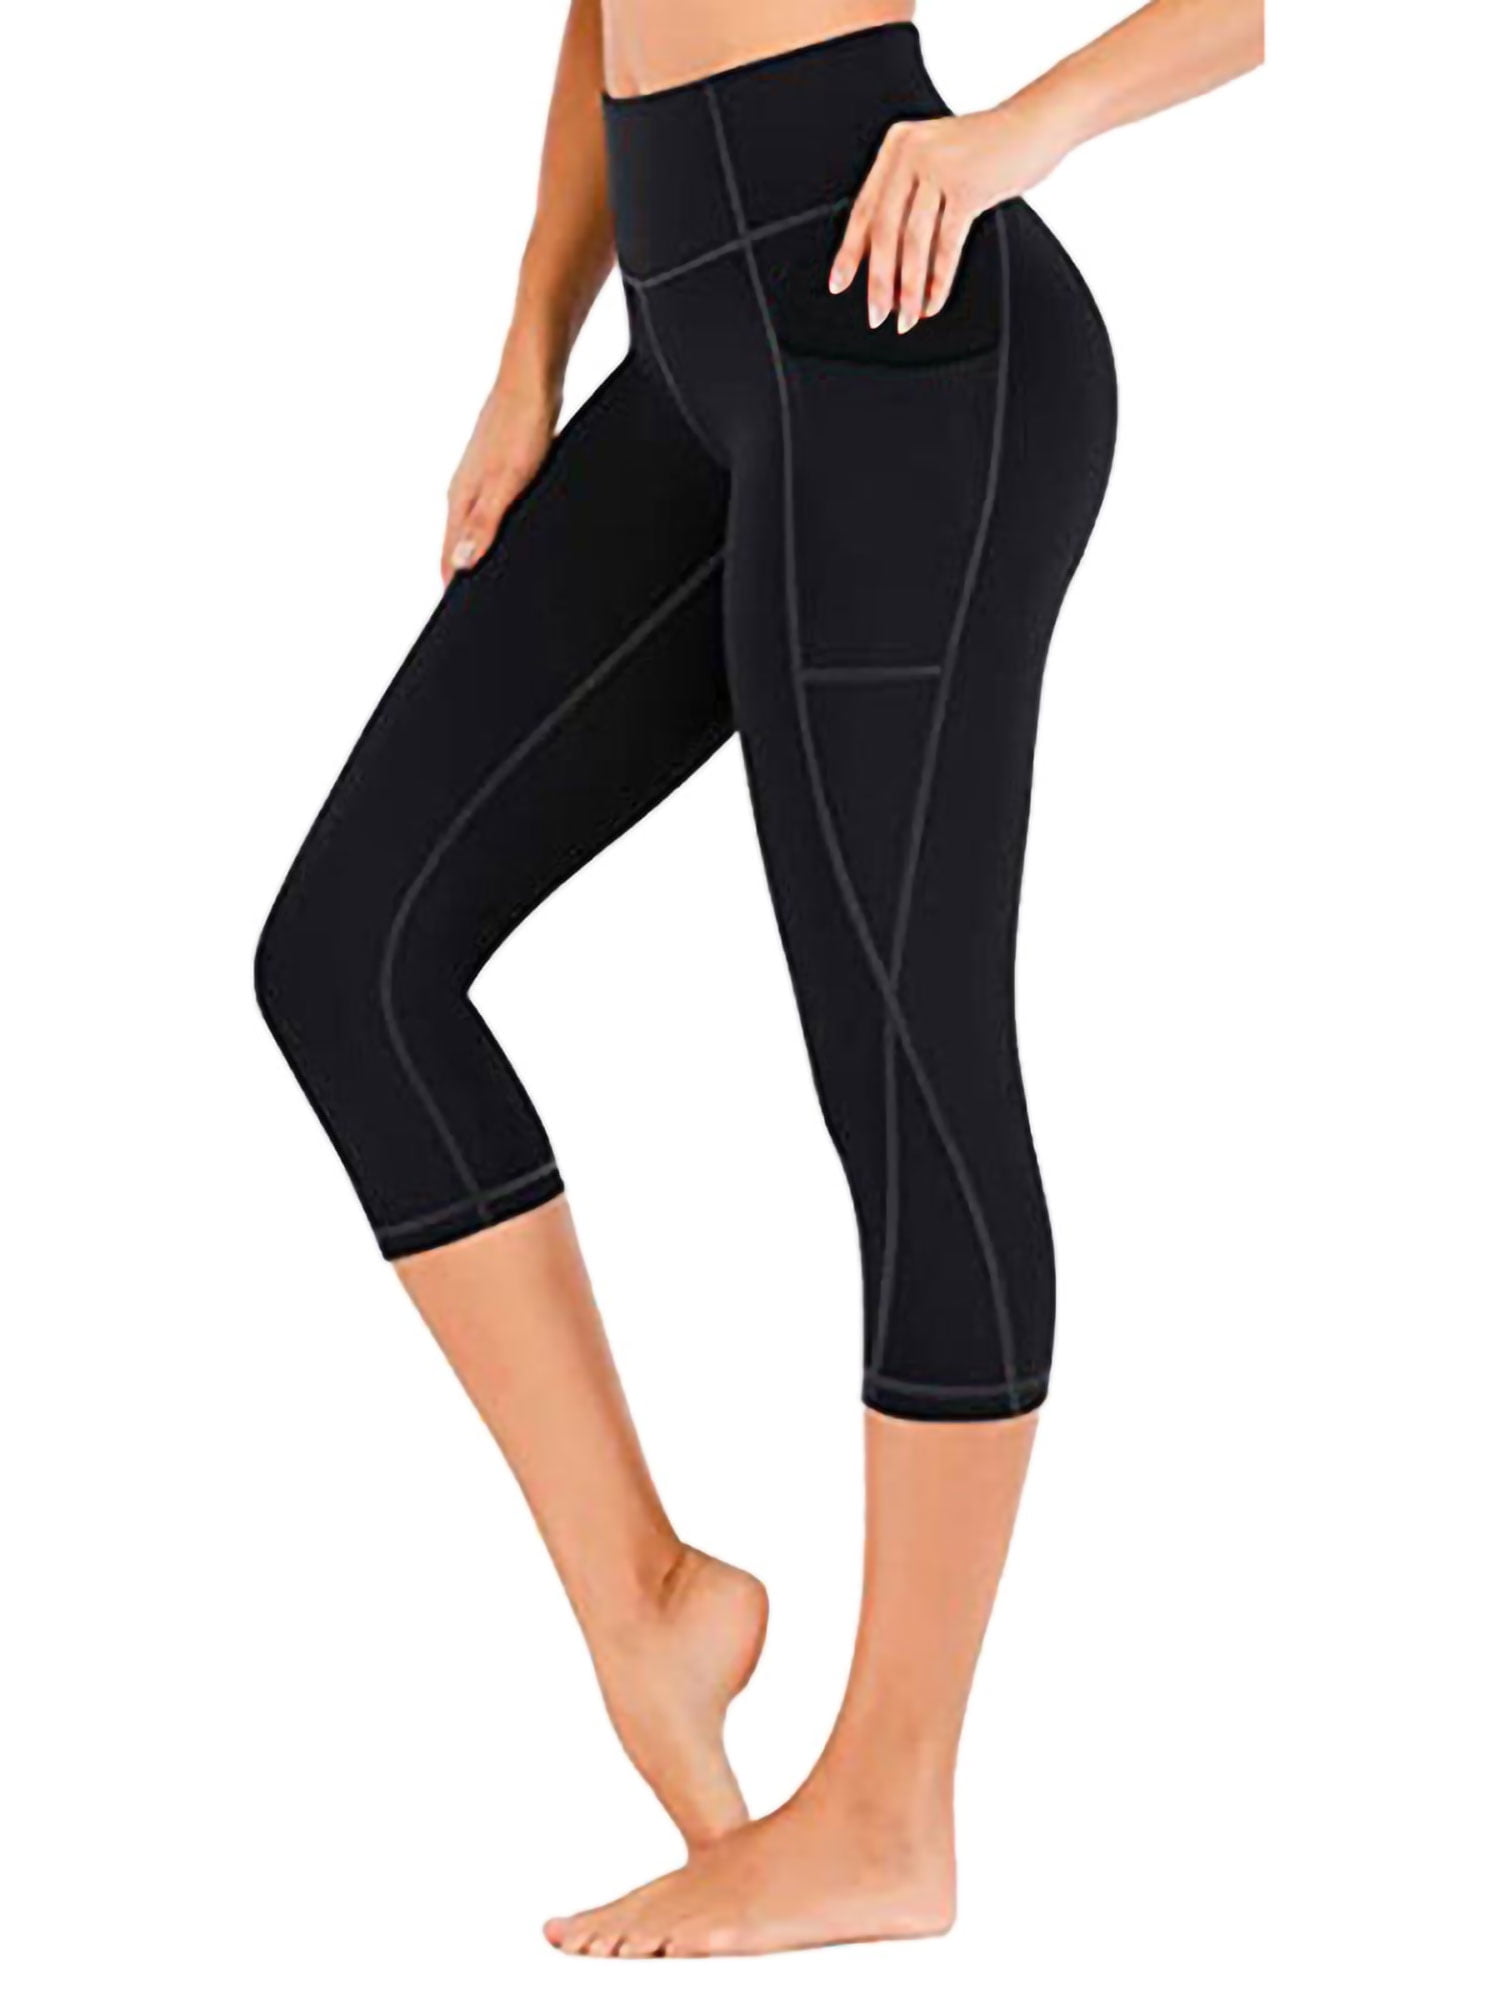 Details about   Women Capri Yoga Pants With Pocket Gym Fitness Sports Workout Cropped Leggings 